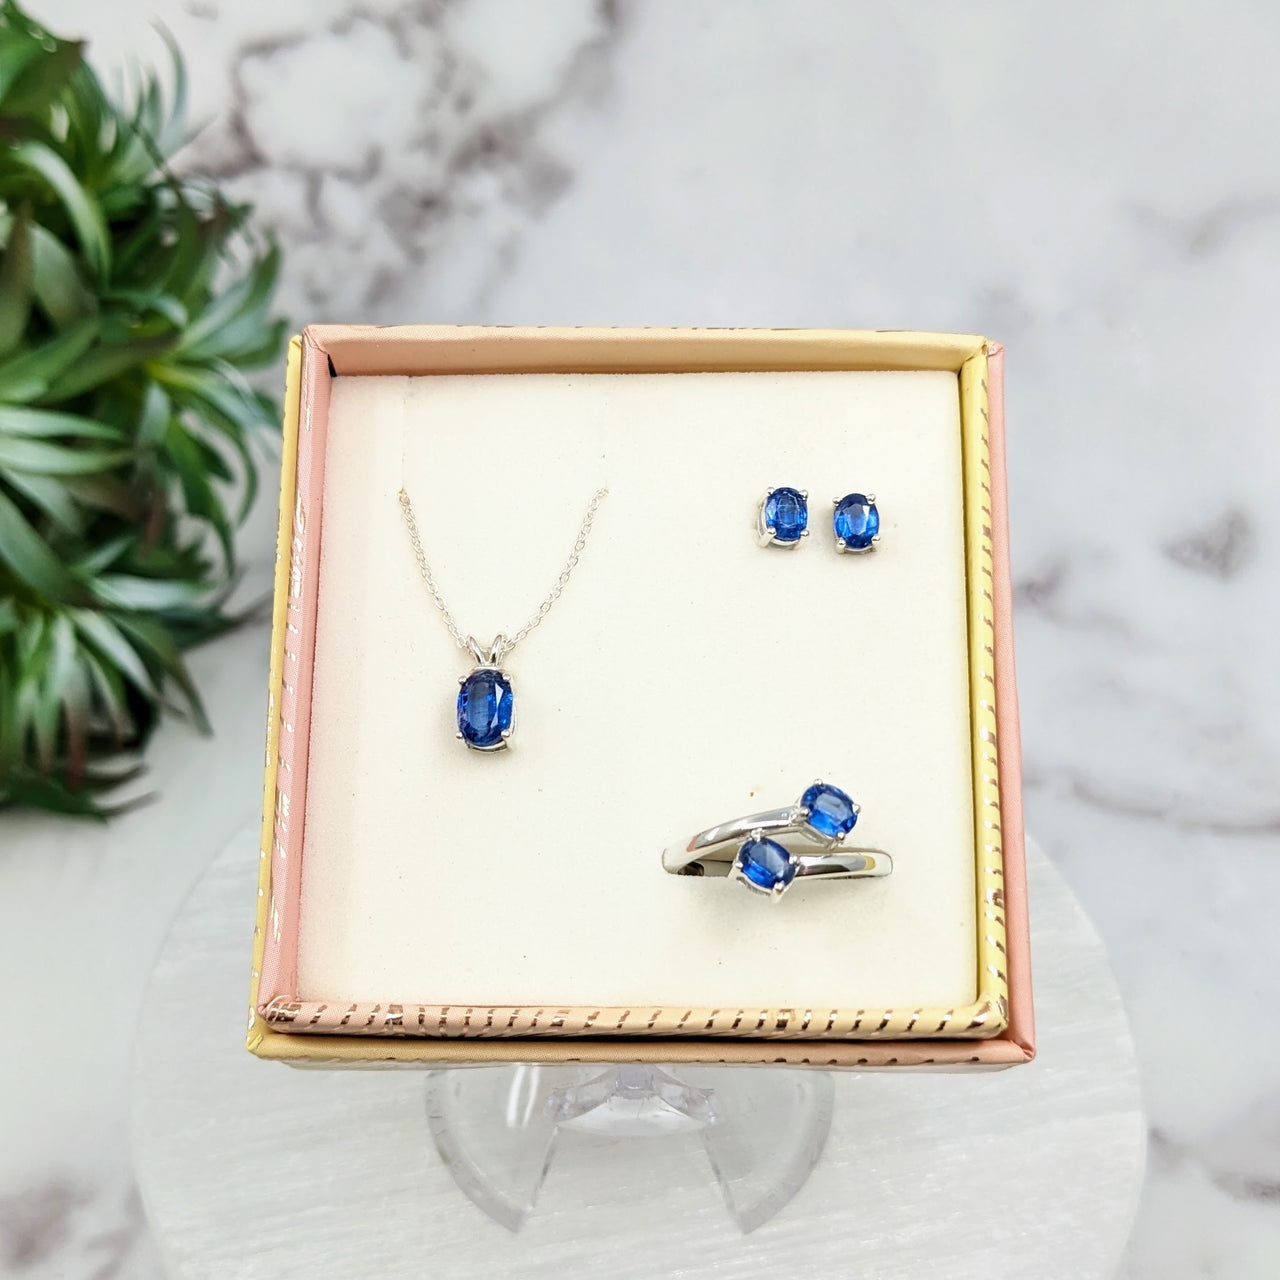 Blue Kyanite Faceted Jewelry 3 pc Box Set Sterling Silver Earrings, Pendant, Adjustable Ring #LV3232